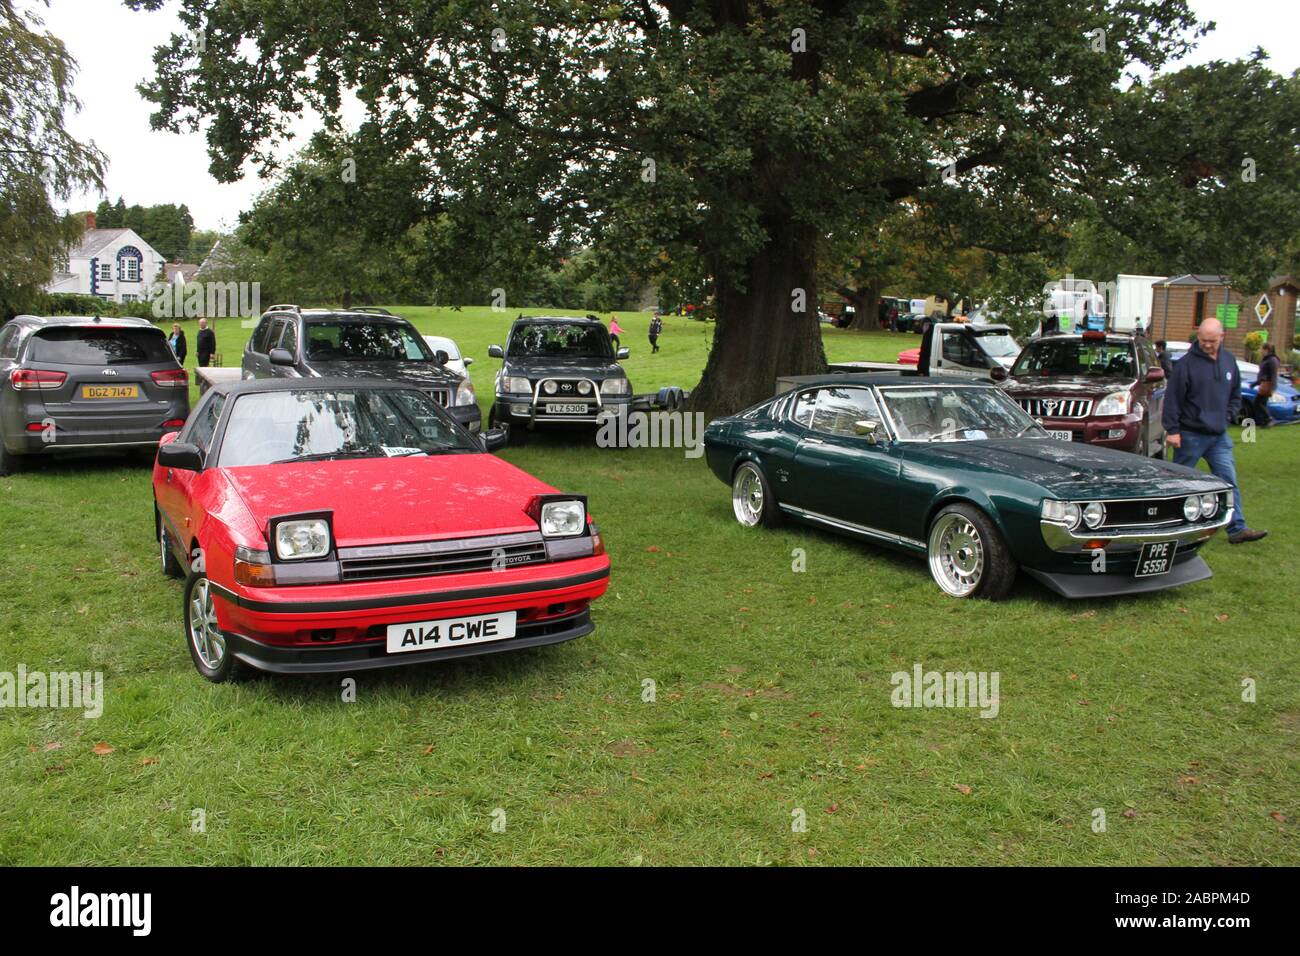 Red 1987 Toyota Celica GT and a green 1977 Toyota Celica Lift Back seen at Kilbroney VIntage Show 2019 Stock Photo